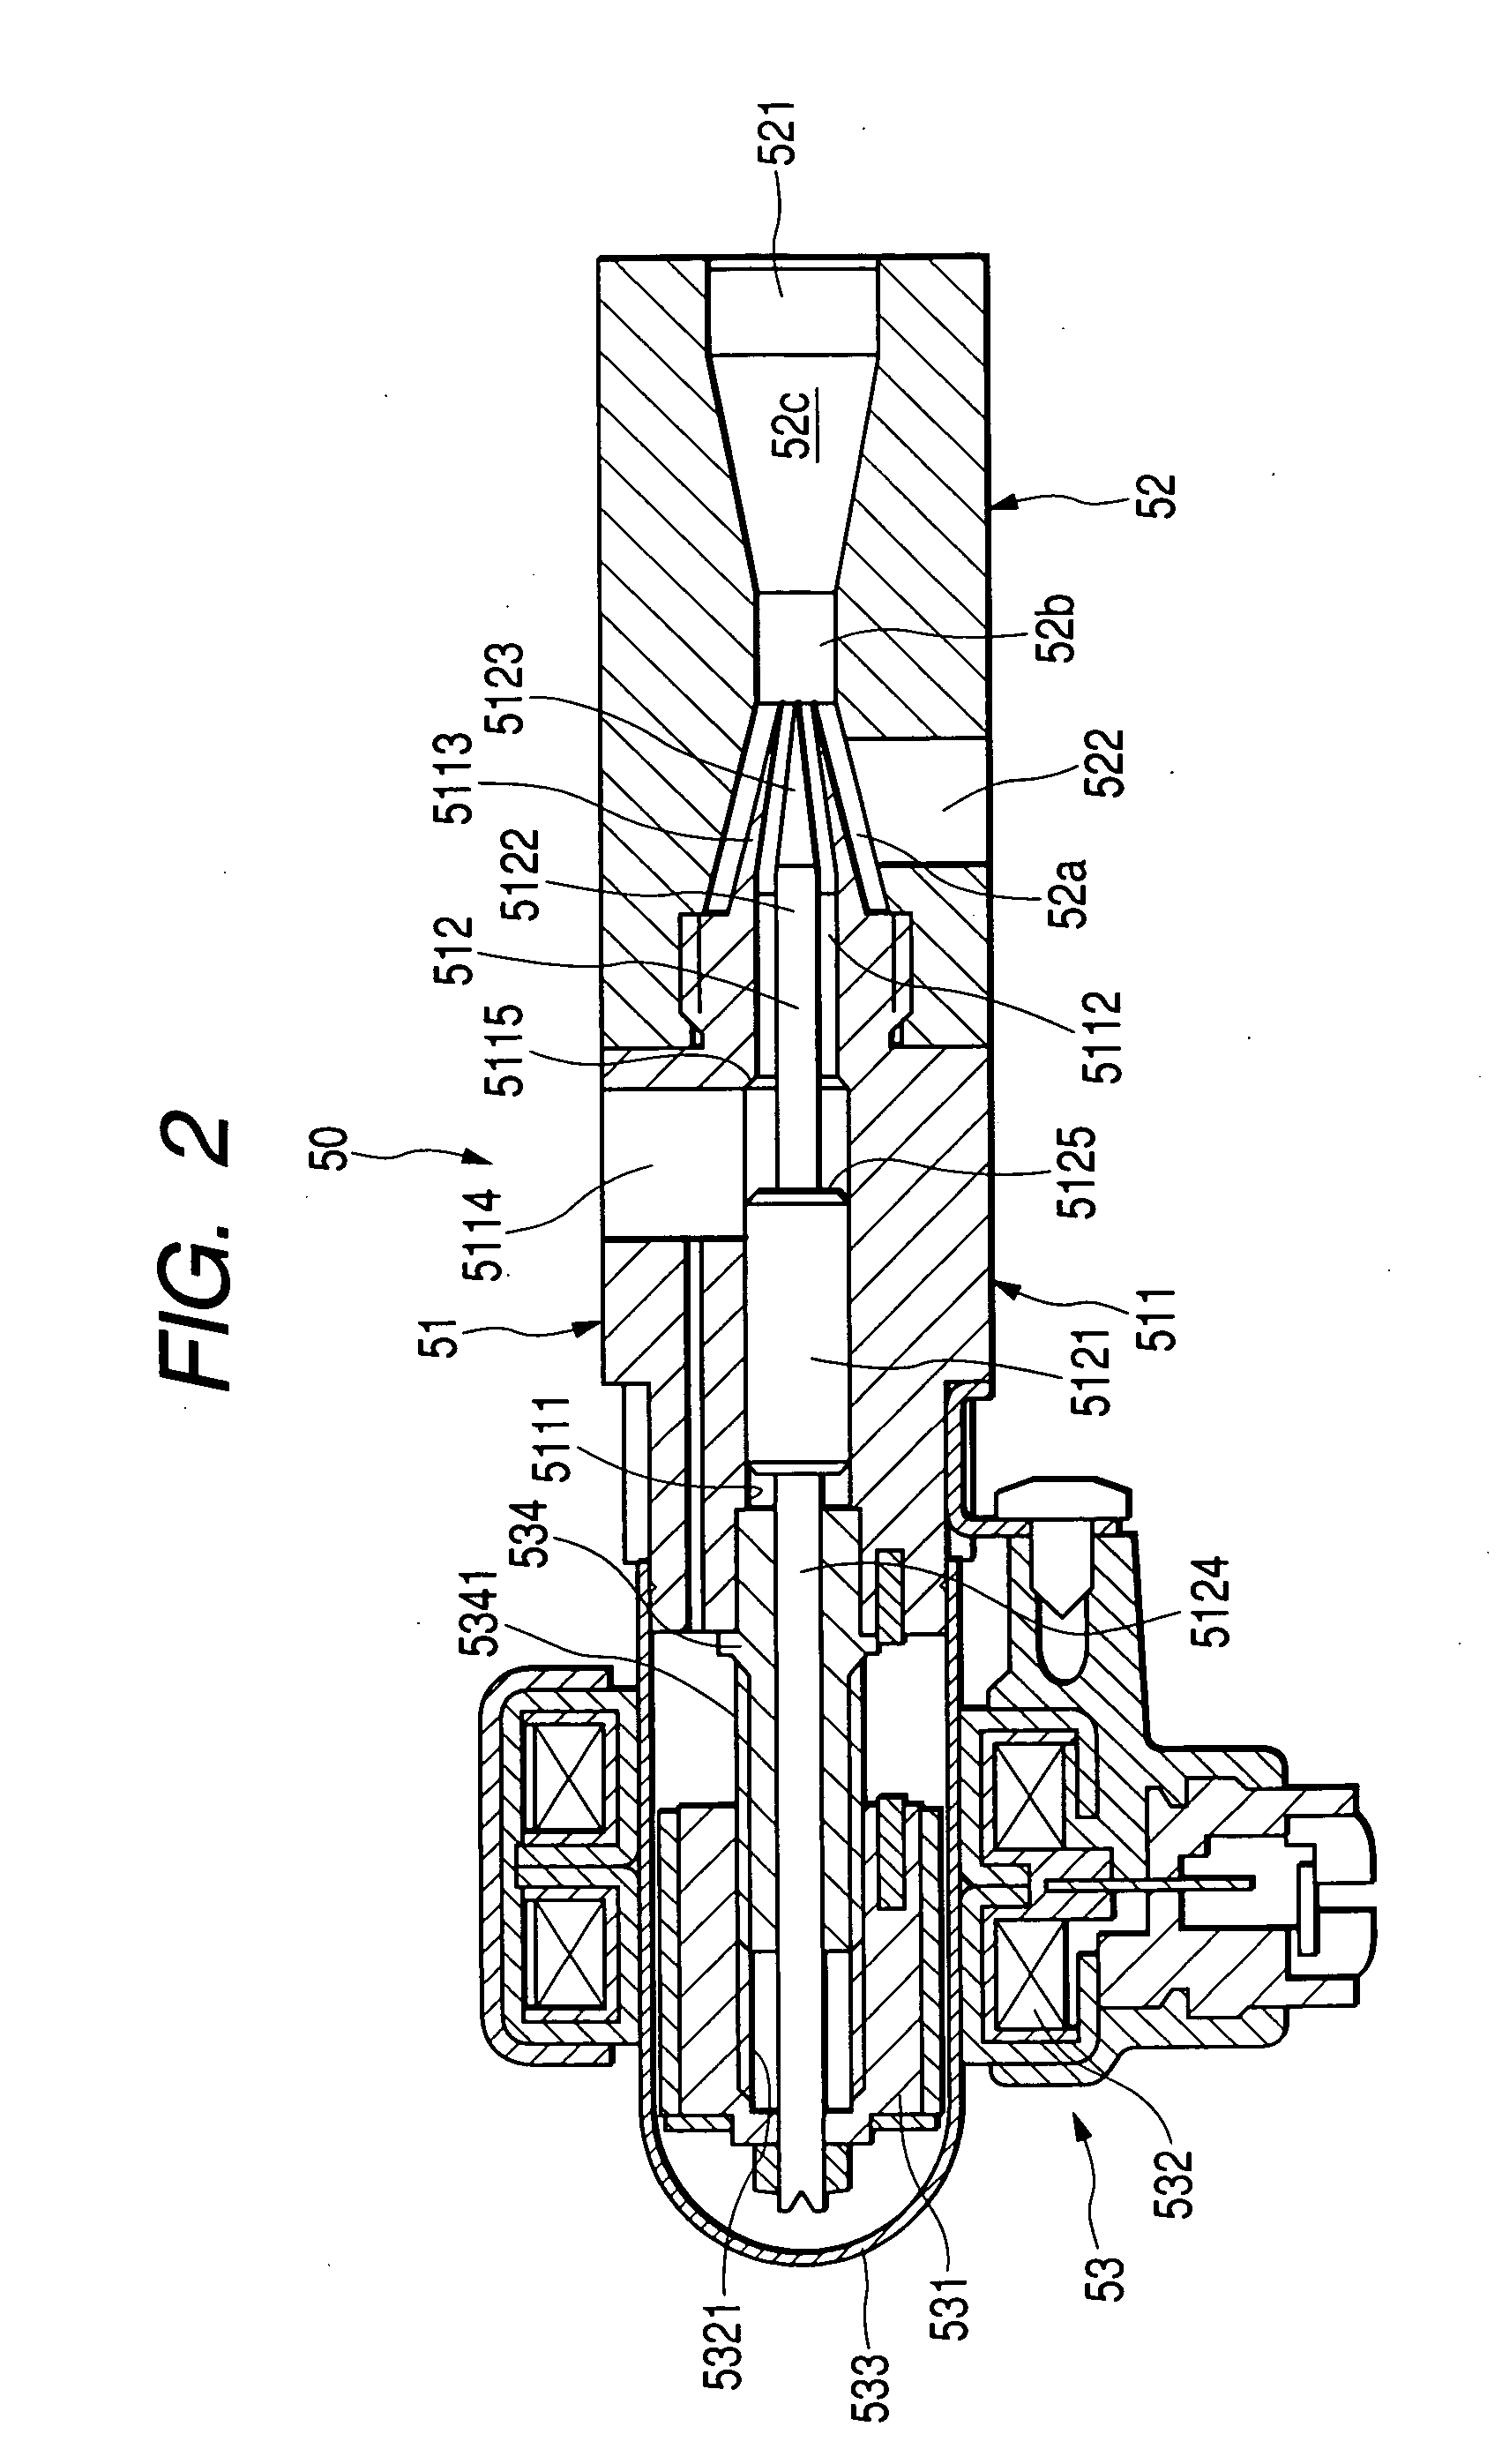 Fuel supply system for fuel cell system designed to ensure stability in regulating flow rate of recirculated off-gas